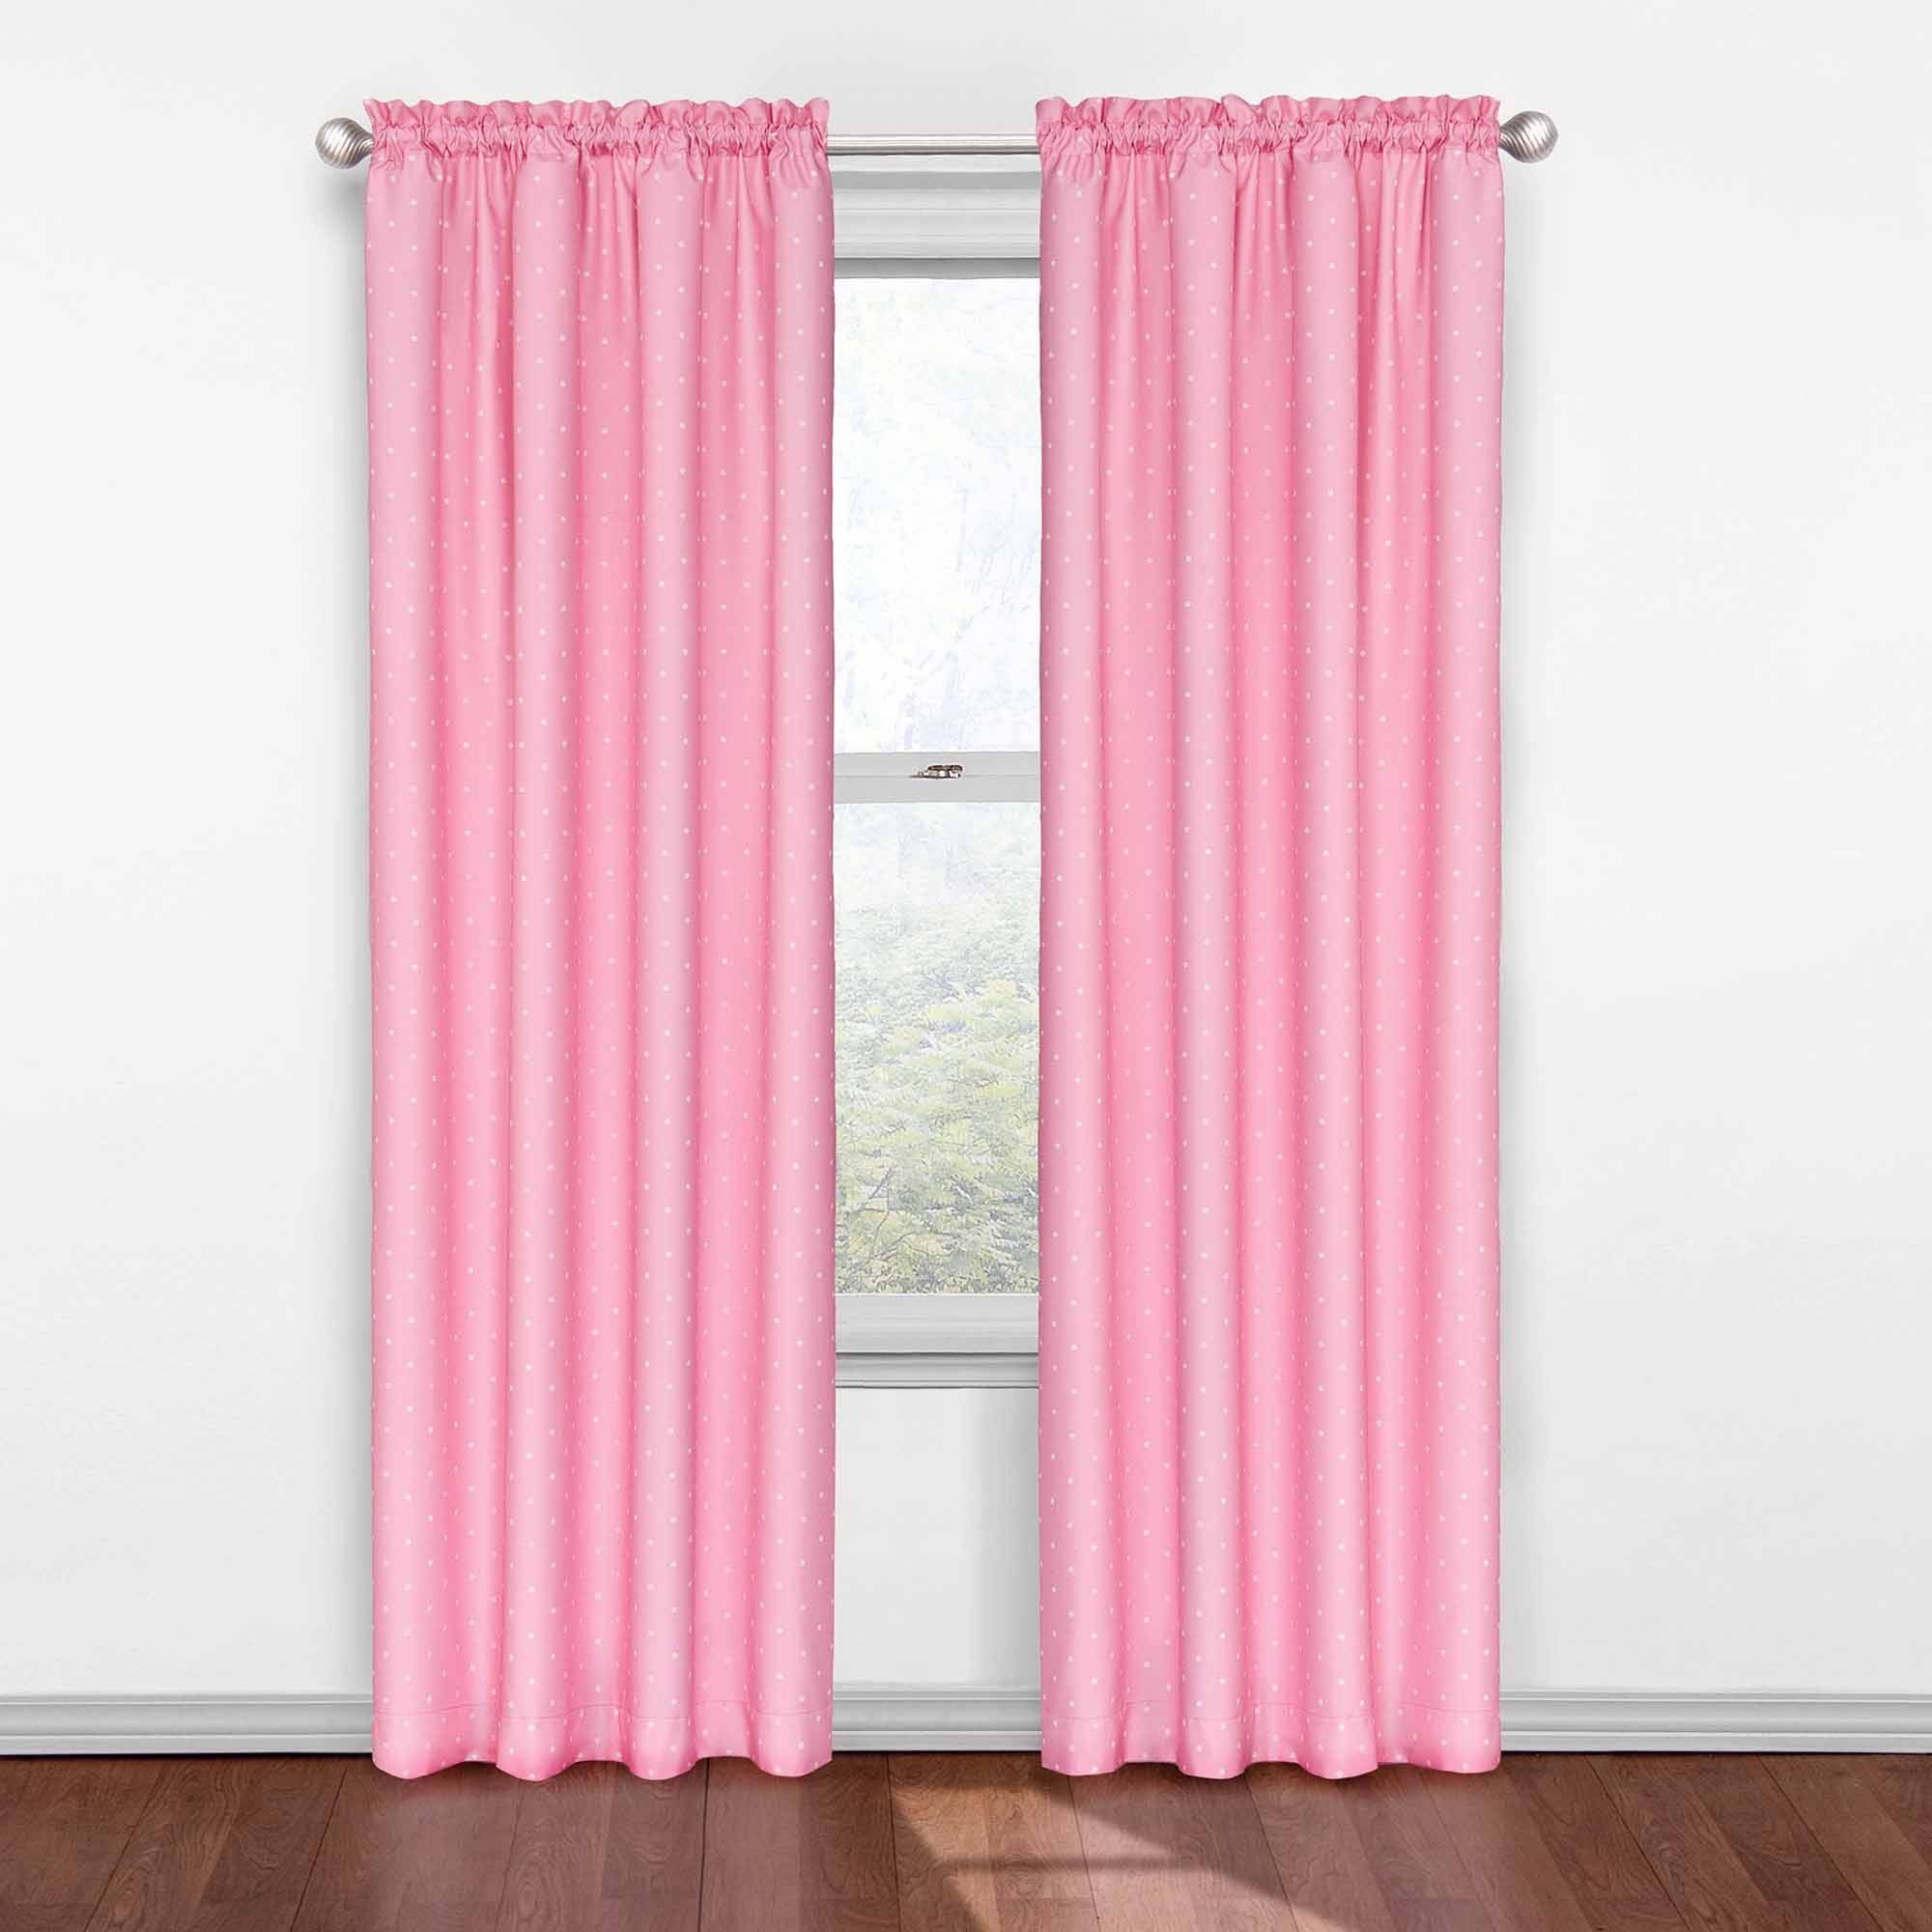 Curtains Elegant Target Eclipse Curtains For Interior Home Decor Throughout 96 Inches Long Curtains (View 24 of 25)